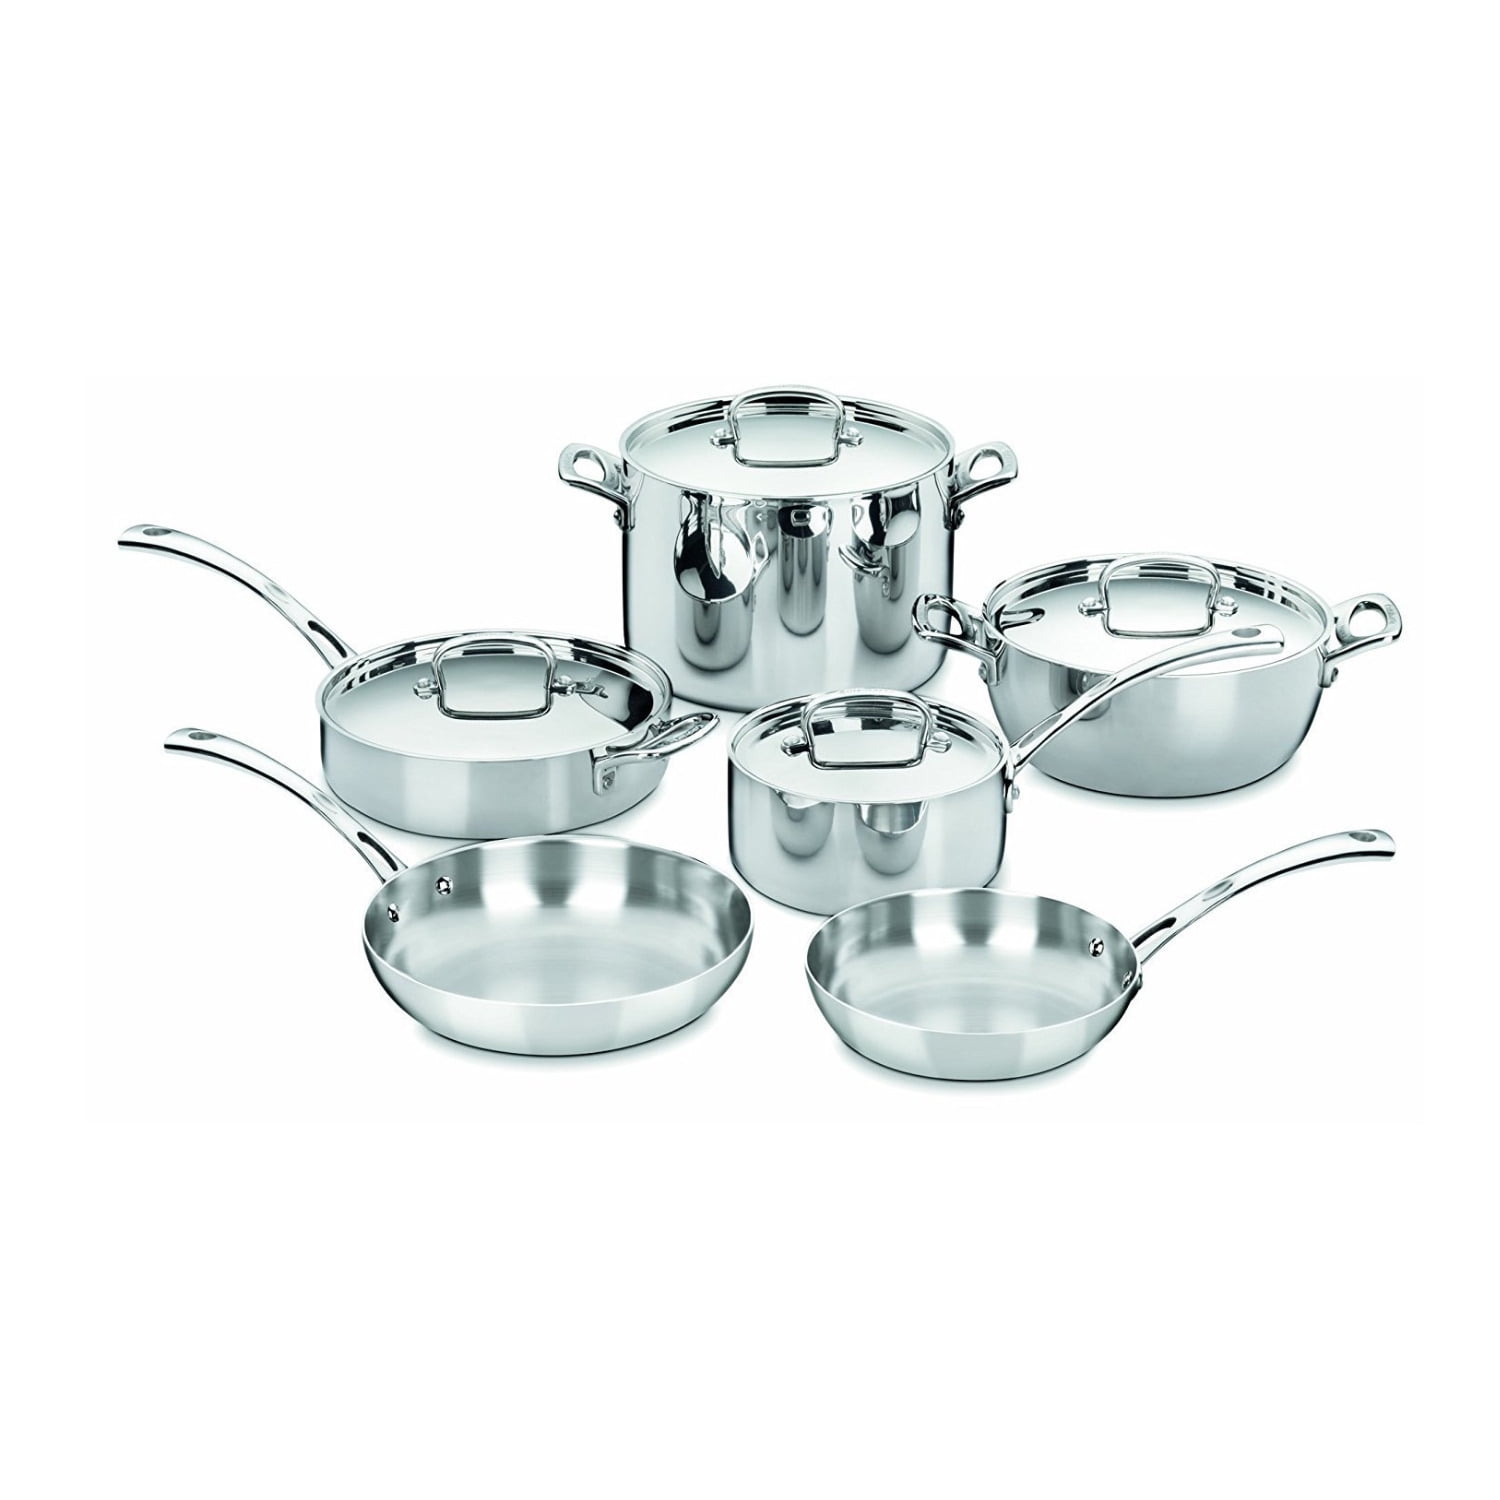 Goodful 12-Piece Classic Stainless Steel Cookware Set with Tri-Ply